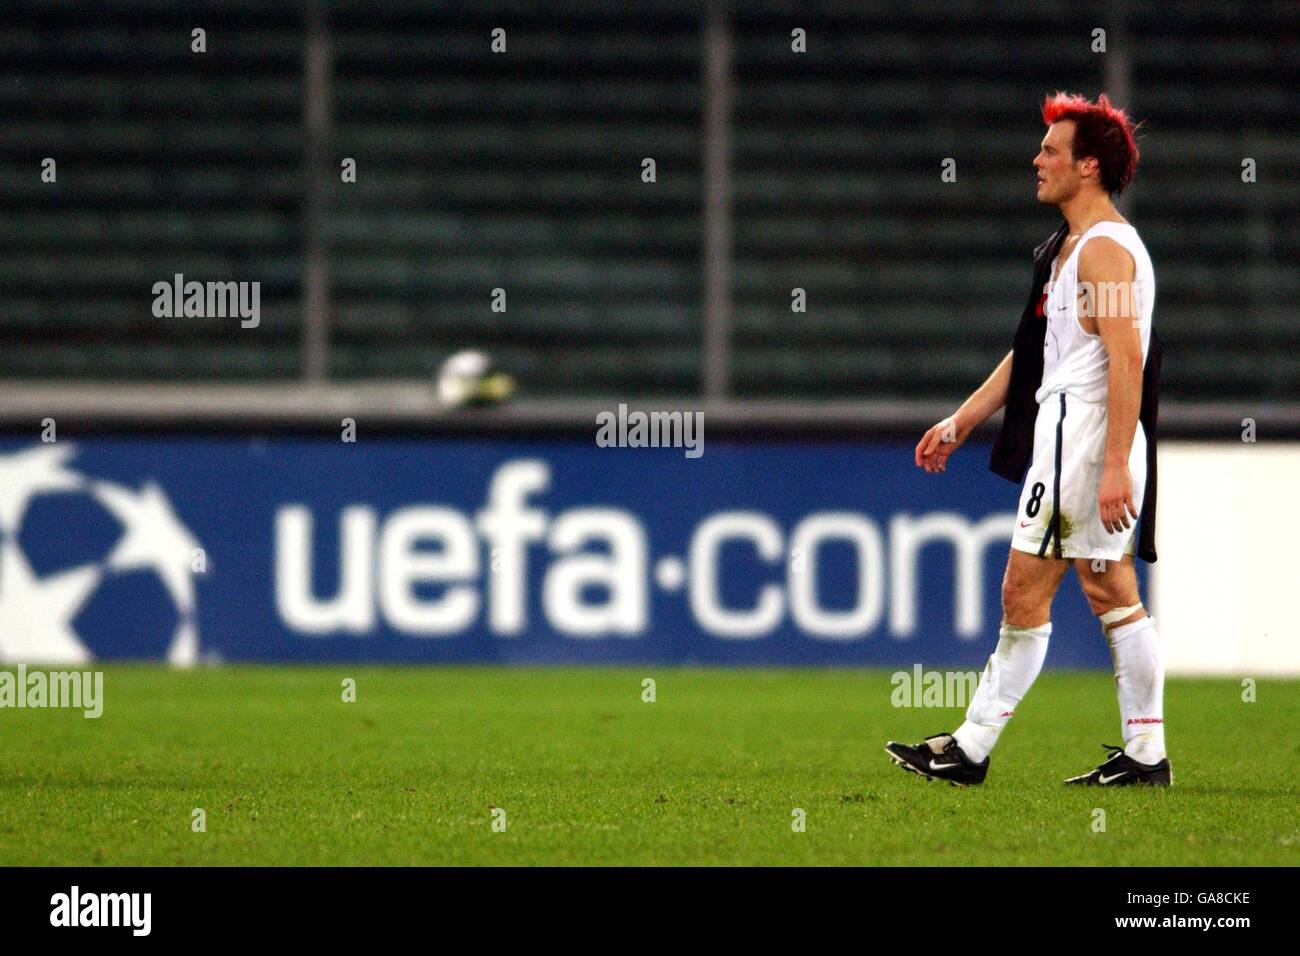 Soccer - UEFA Champions League - Group D - Juventus v Arsenal. Arsenal's Fredrik Ljungberg walks off the field dejected as his team are knocked out of the UEFA Champions League Stock Photo